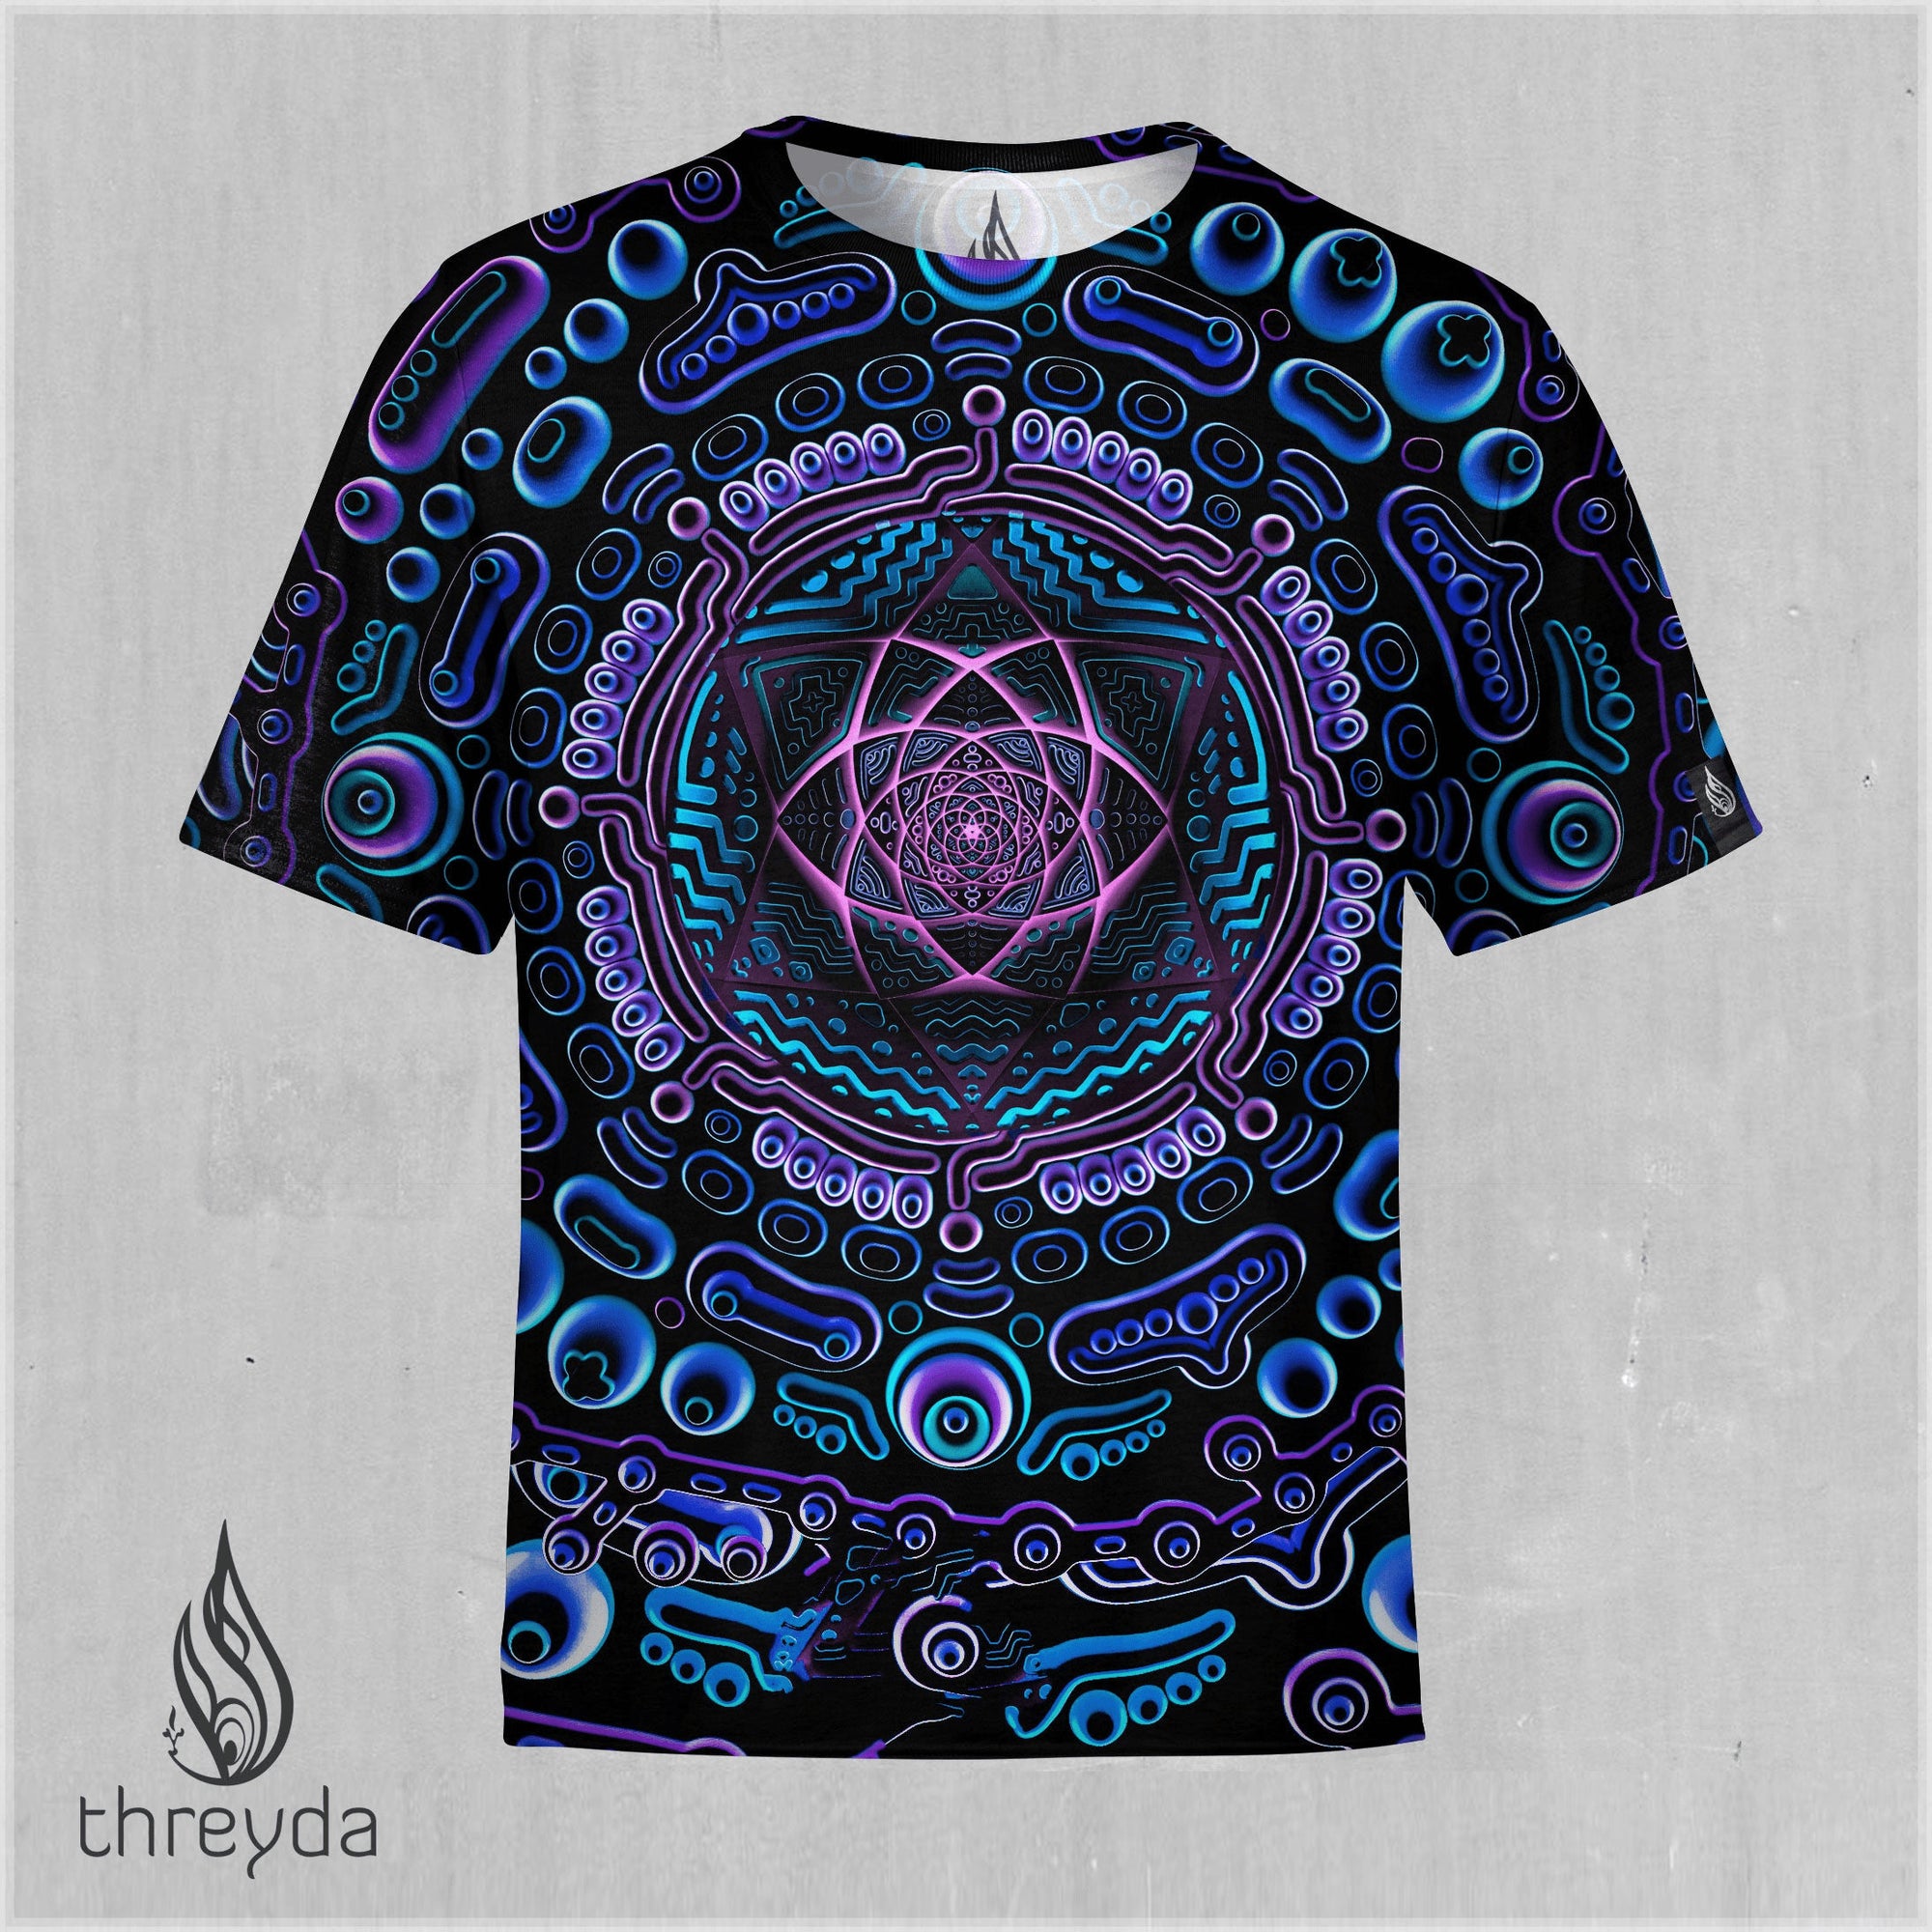 Formless Forms Sublimation Tee by Ben Ridgway